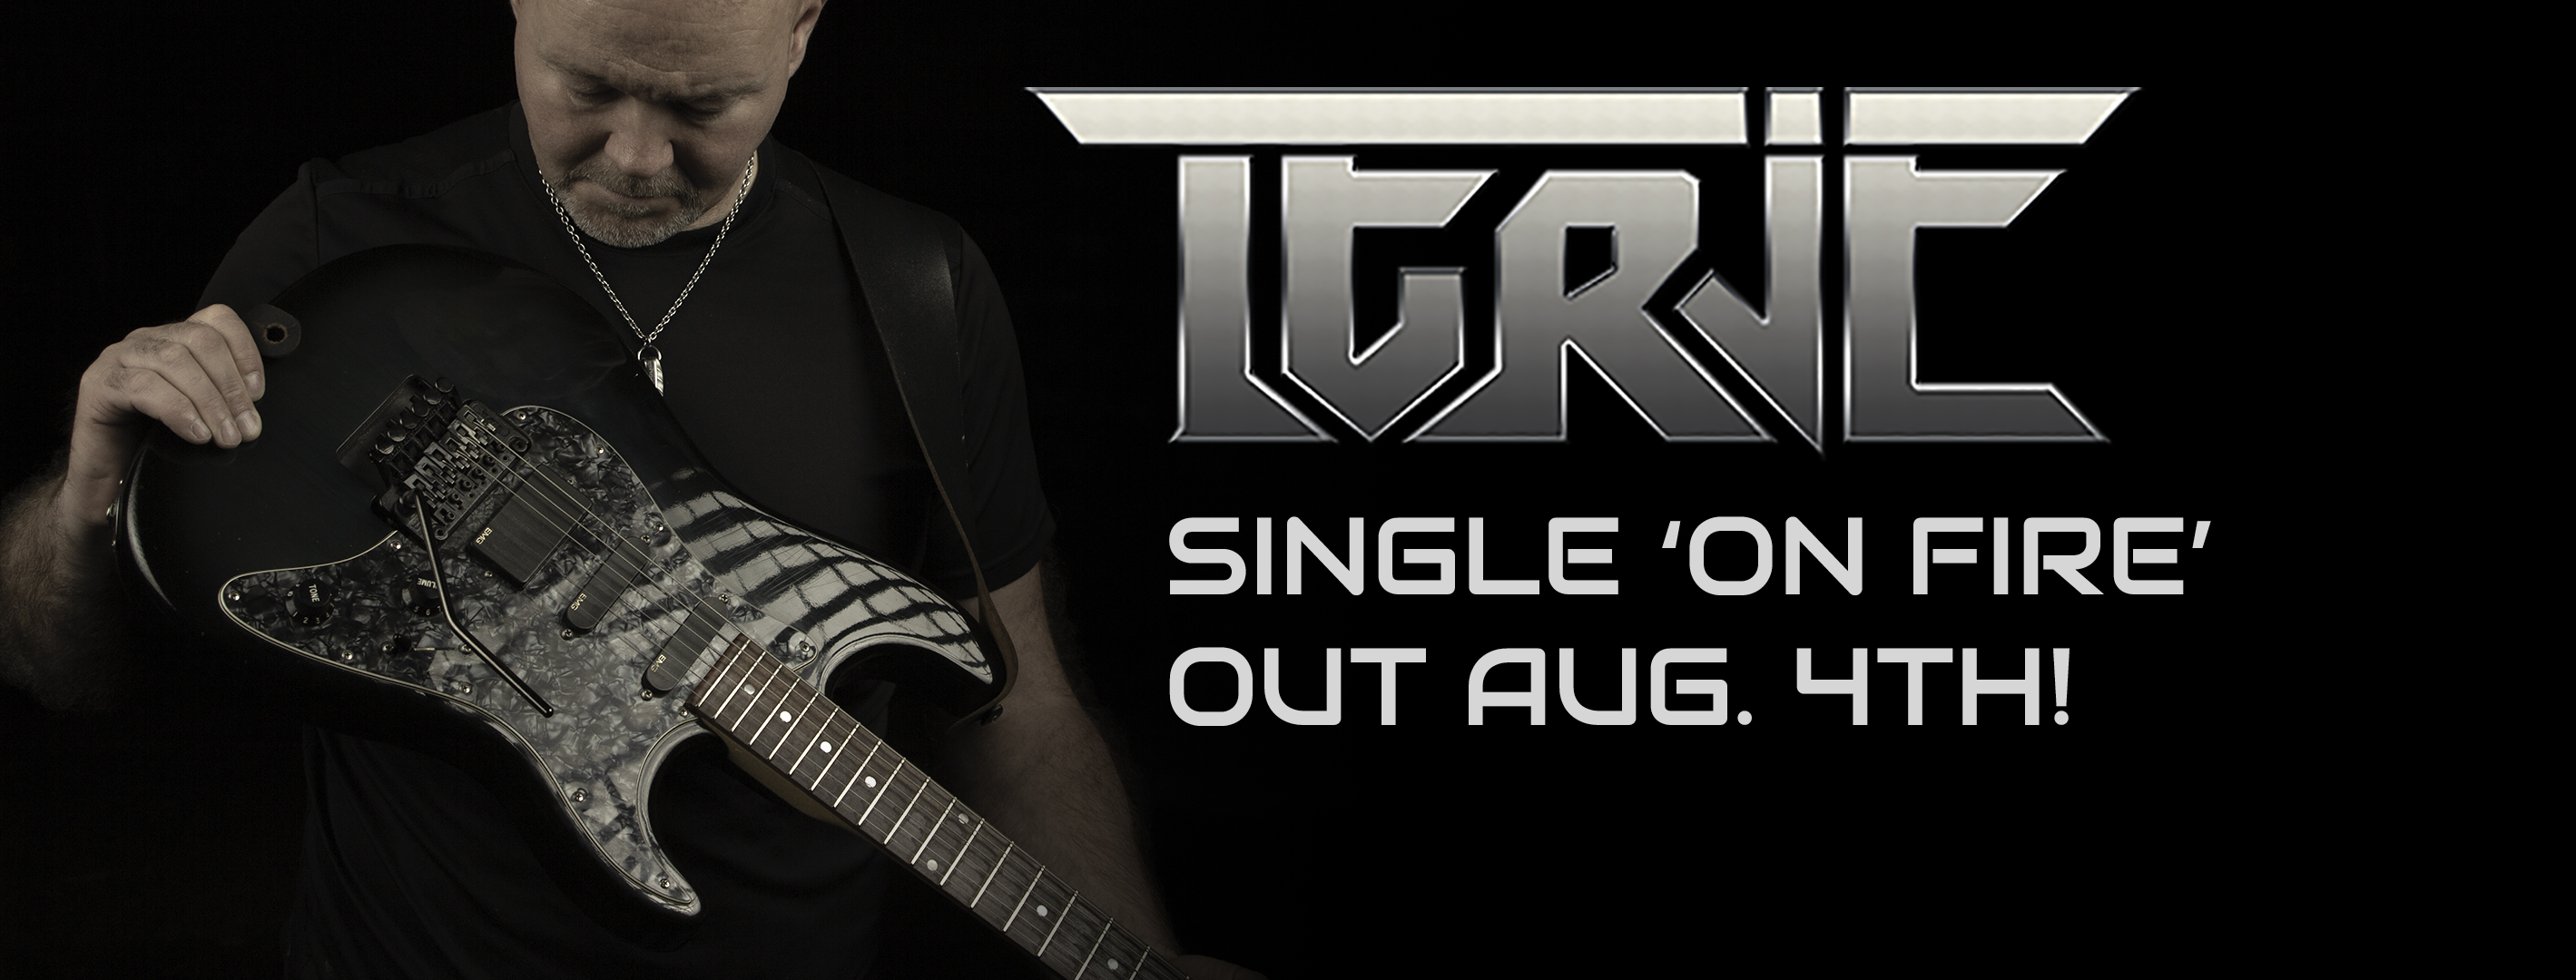 Terje Eide Single ON FIRE Out Aug. 4th.